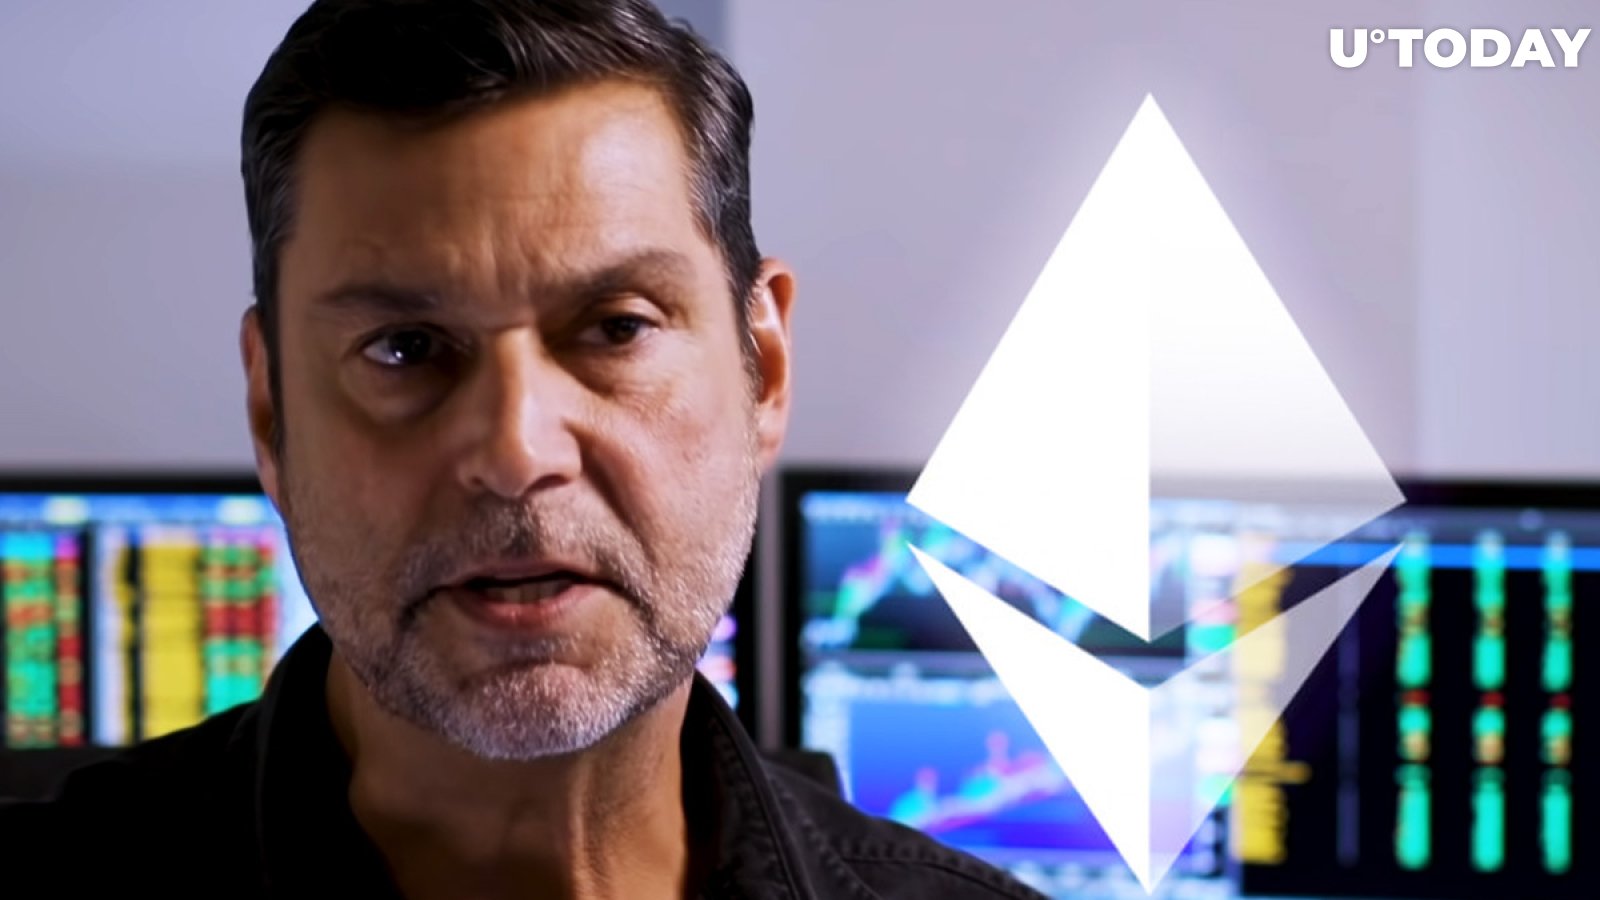 Ethereum Might End Up Outperforming Bitcoin, According to Raoul Pal